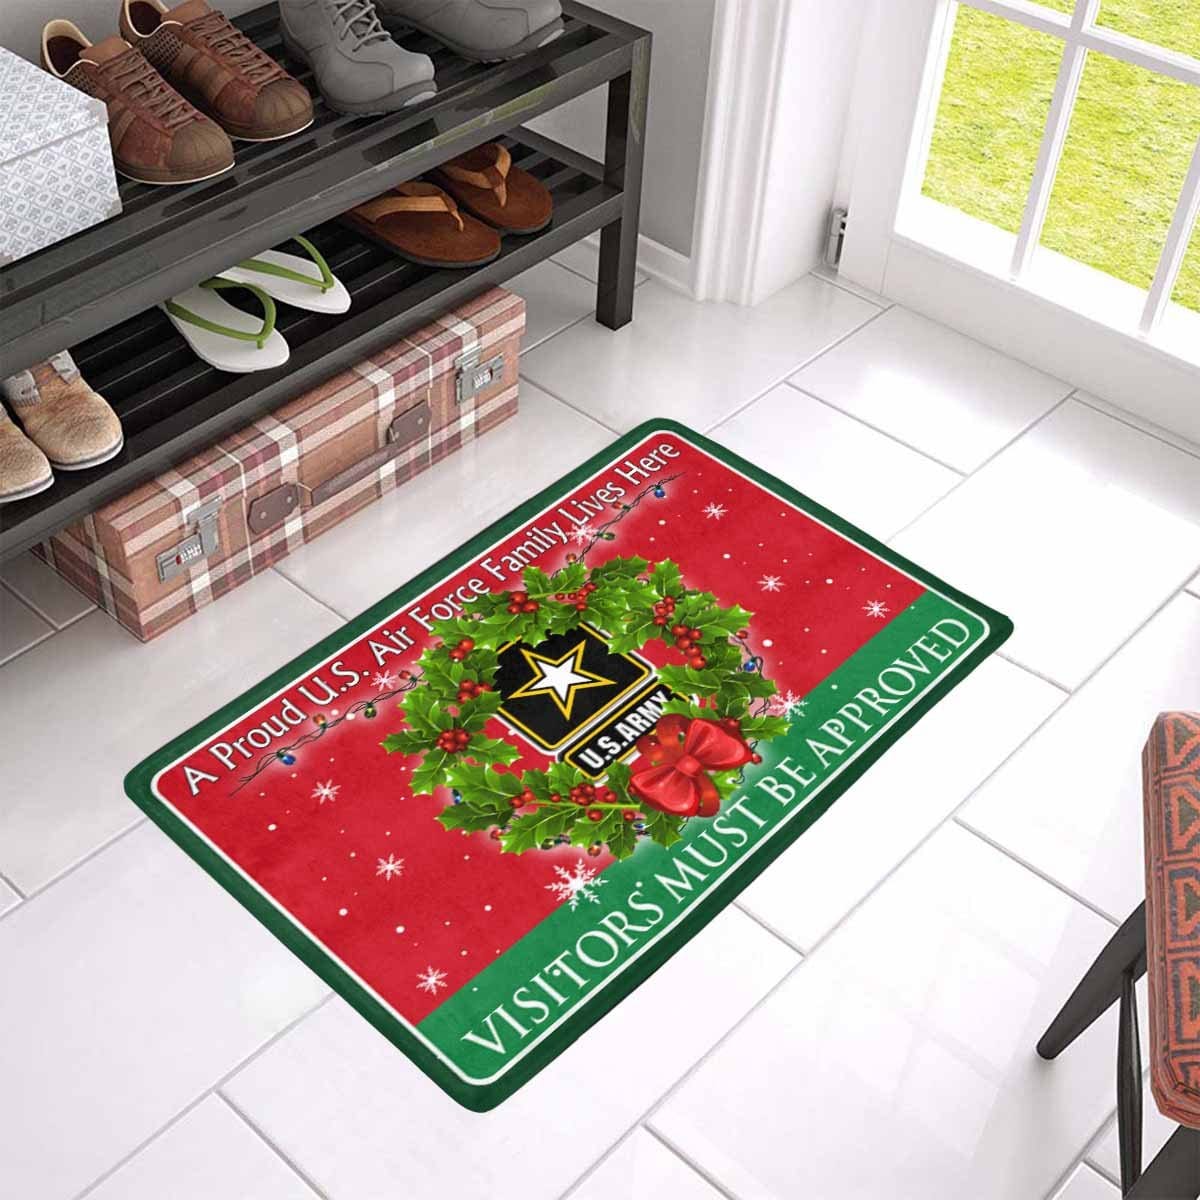 A Proud U.S Army Family Lives Here- Visitor must be approved- Christmas Doormat-Doormat-Army-Logo-Veterans Nation